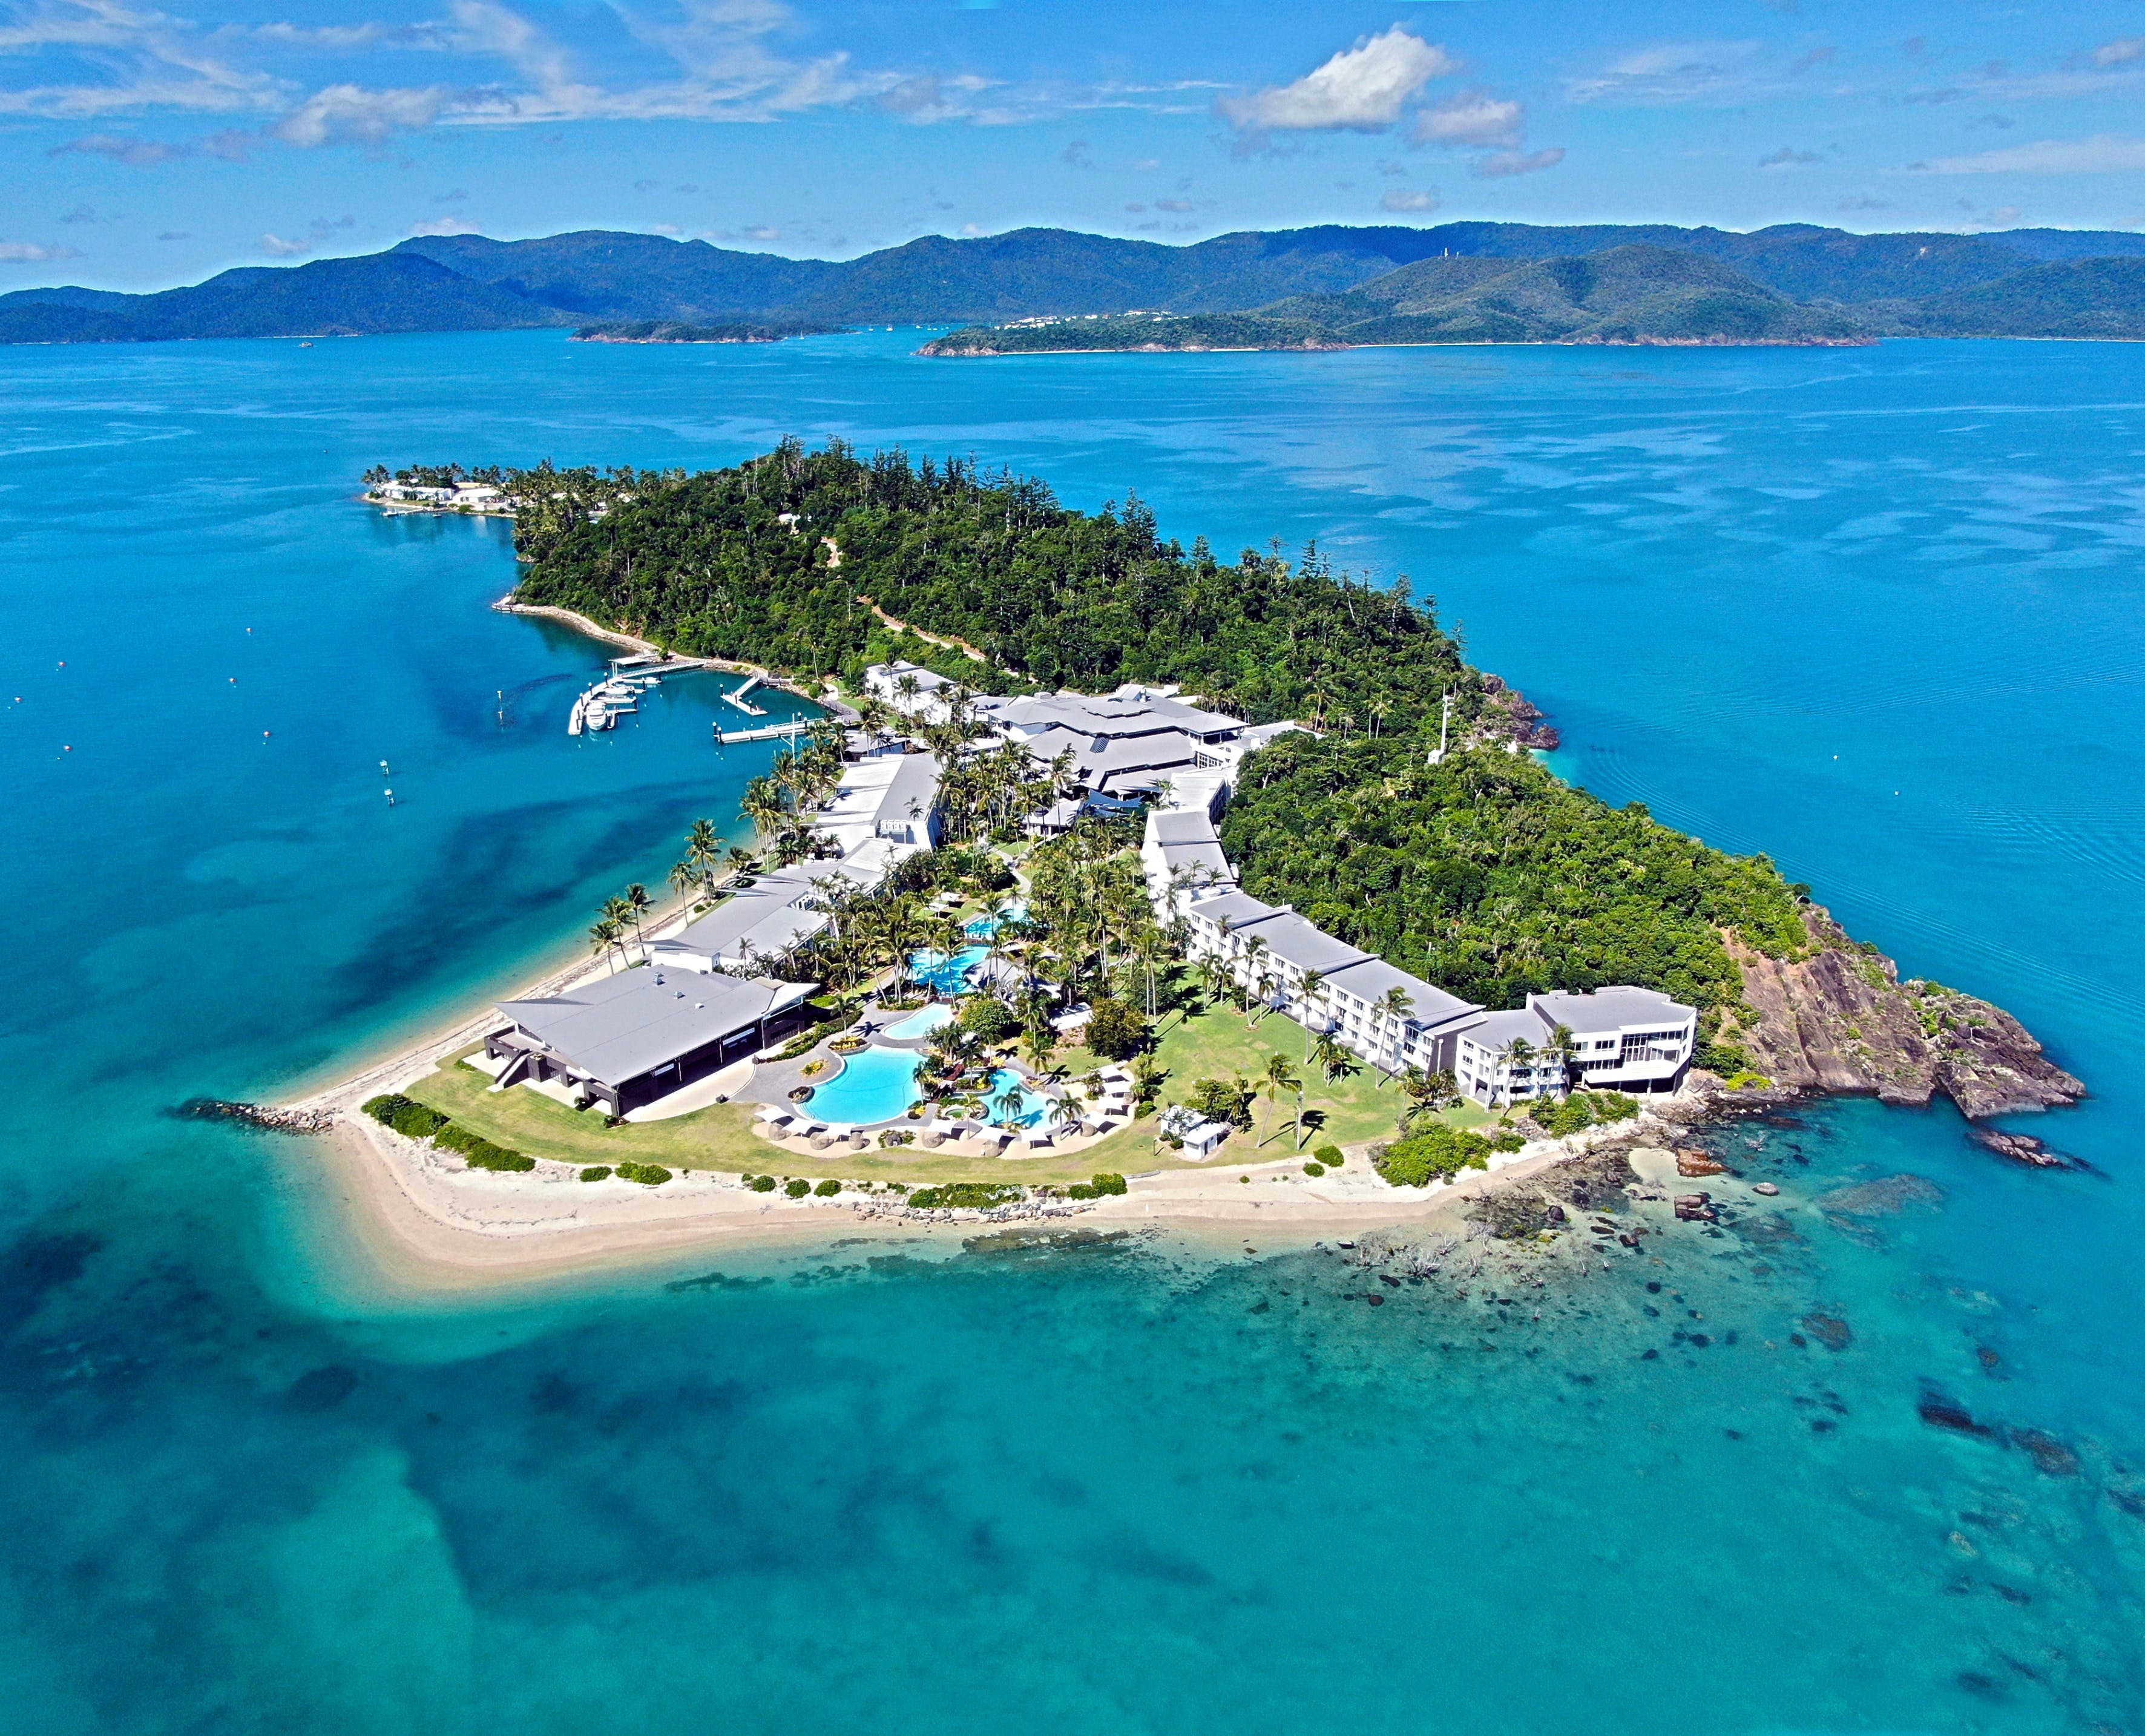 Daydream Island Resort and Living Reef - Accommodation in Surfers Paradise